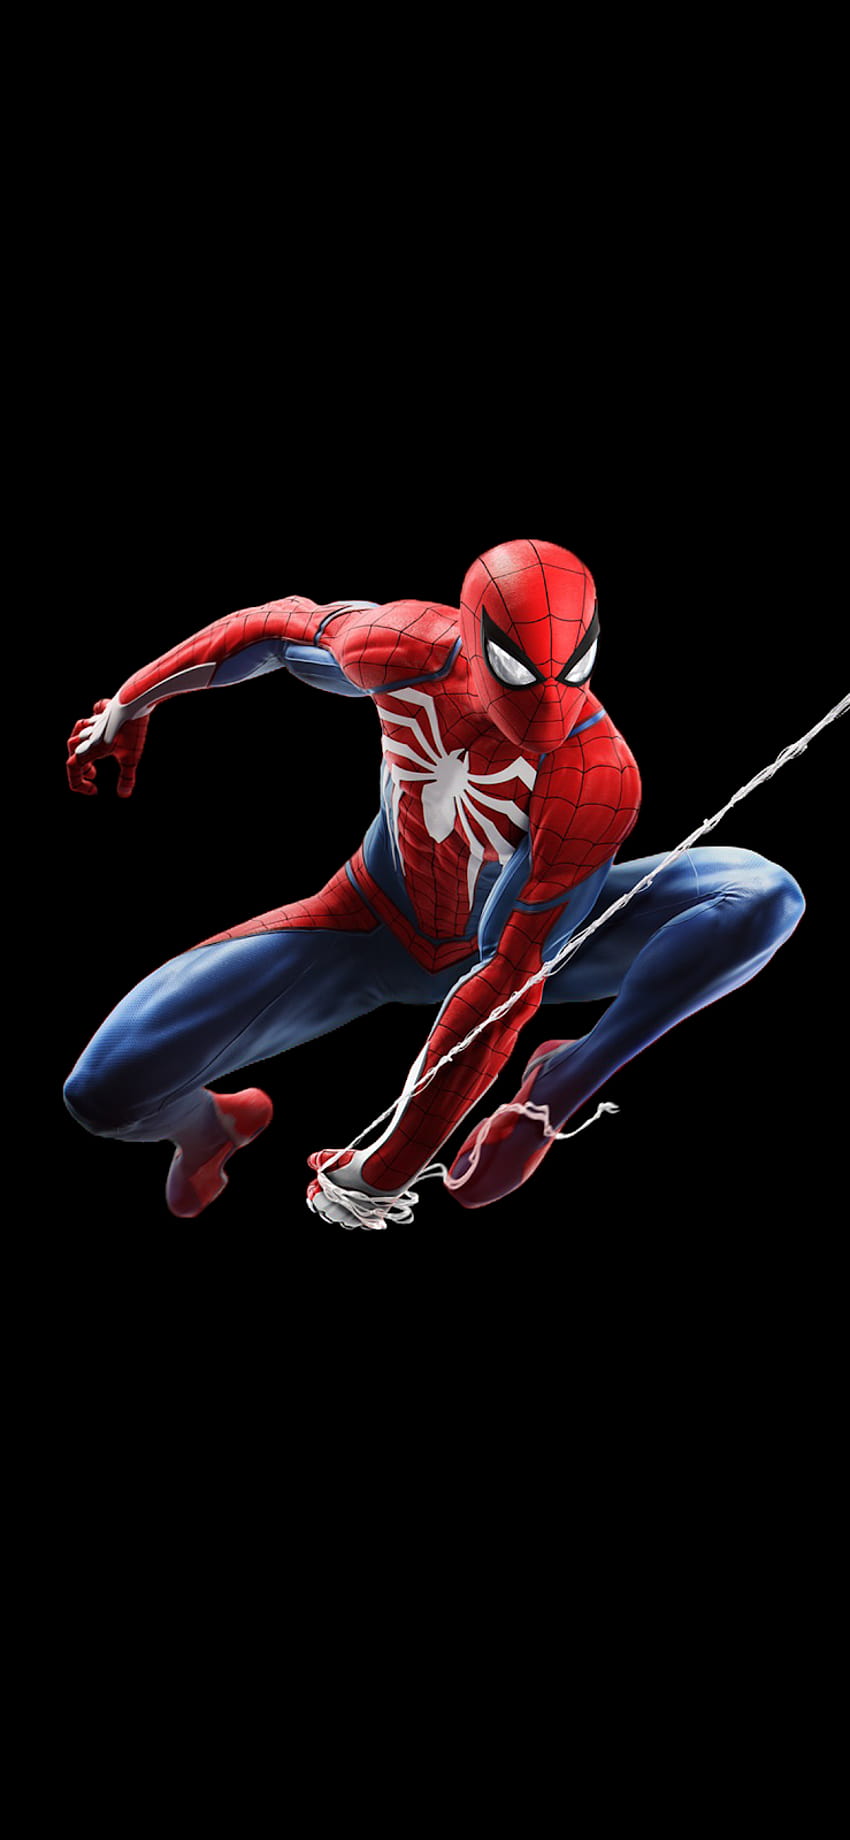 Download wallpaper 750x1334 spiderman ps4 pro video game swing game  iphone 7 iphone 8 750x1334 hd background 8235